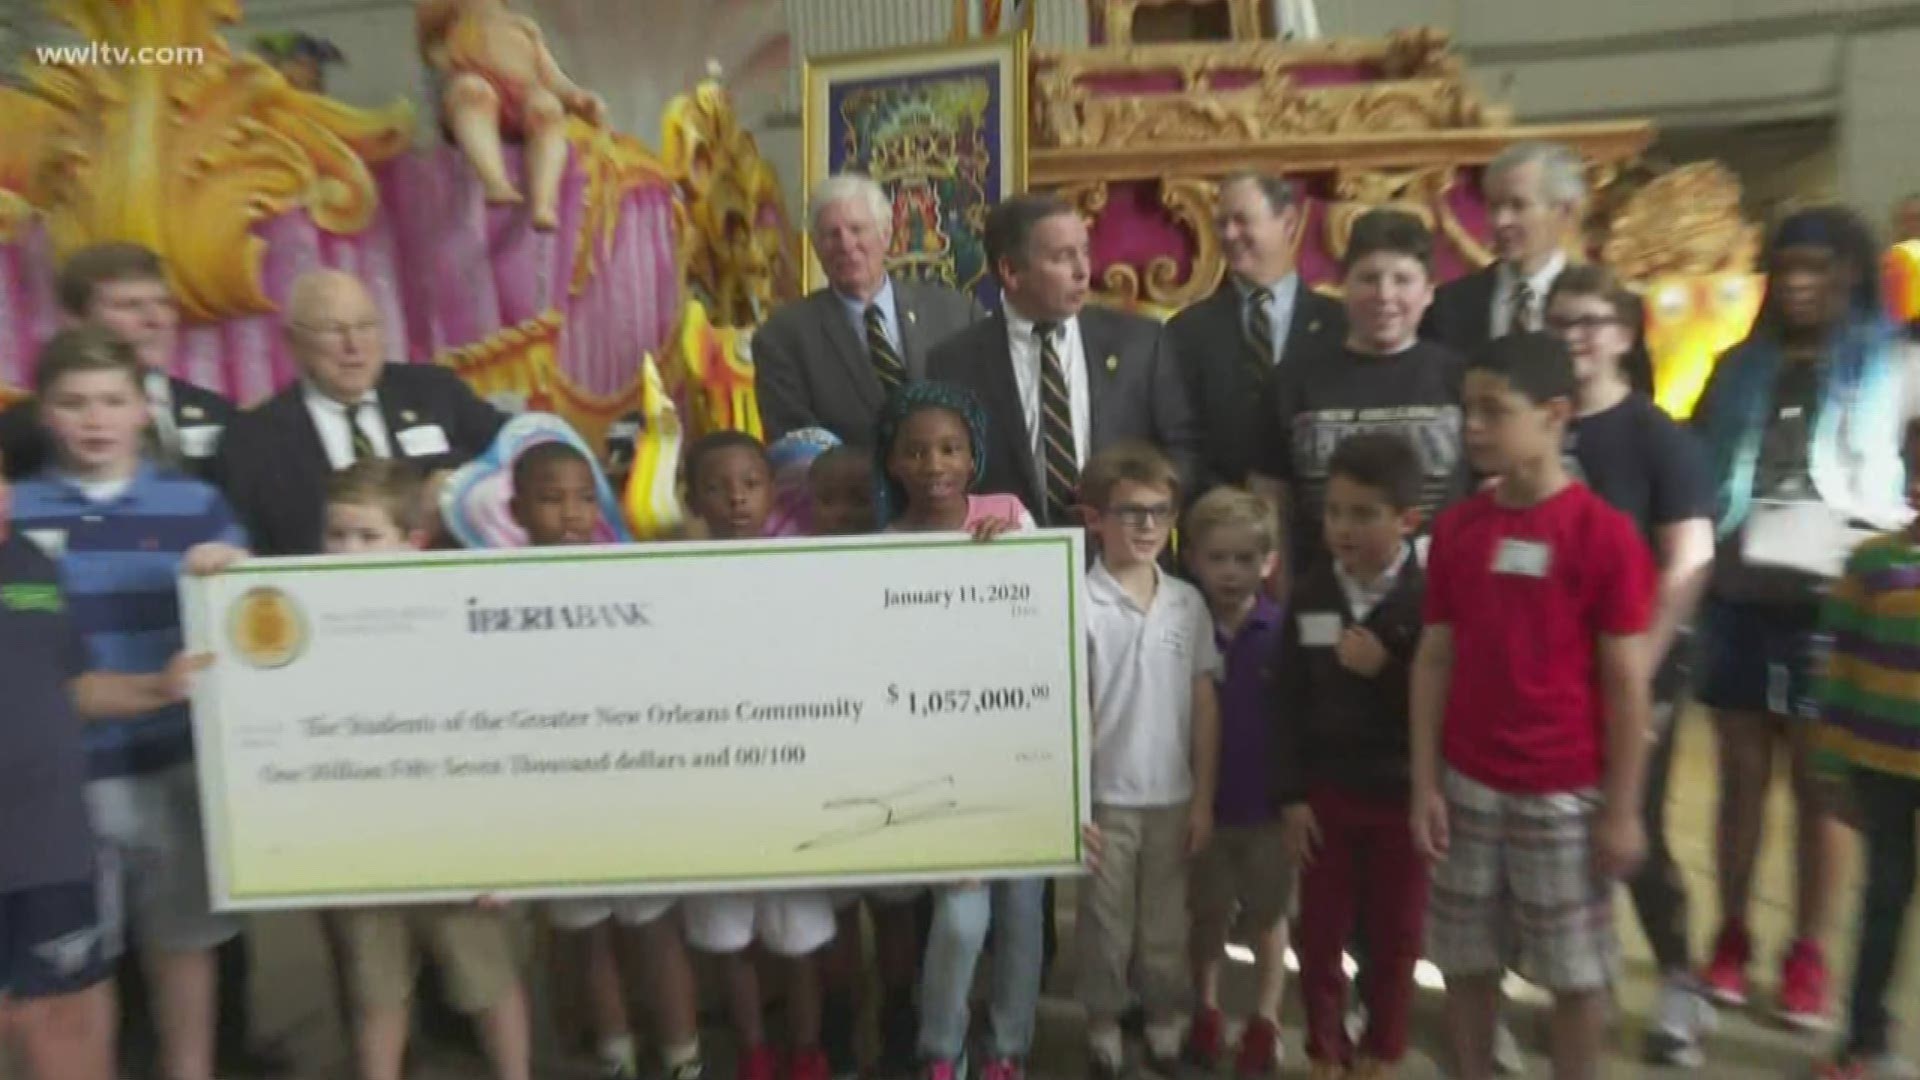 Since 2007, Rex Organization's foundation has awarded more than $8 million in education grants